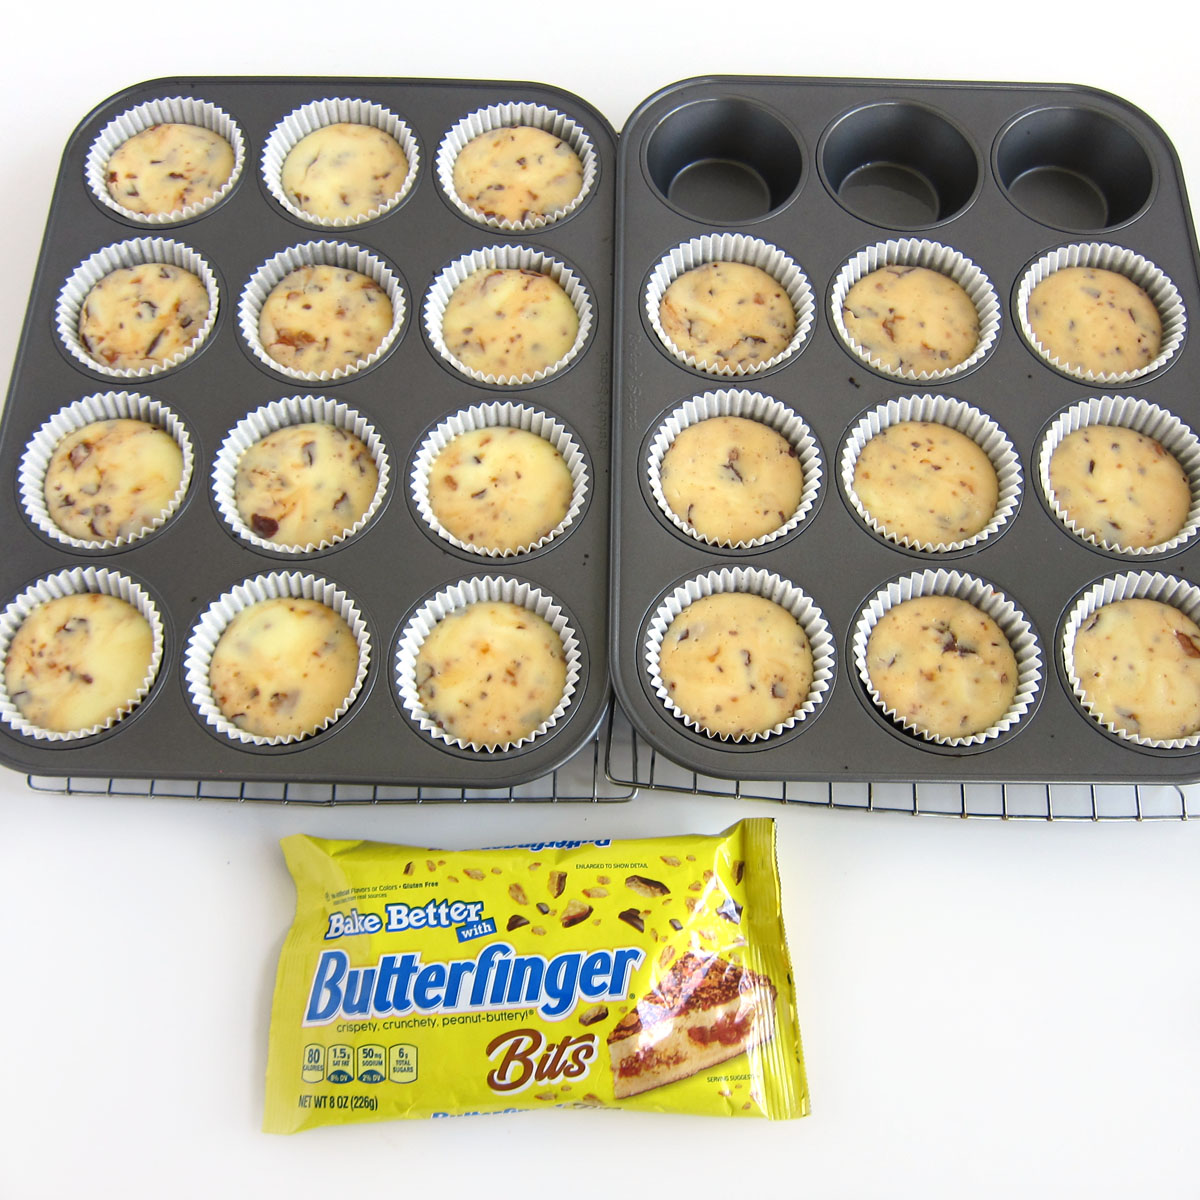 Mini Butterfinger Cheesecakes baked in a cupcake pan.